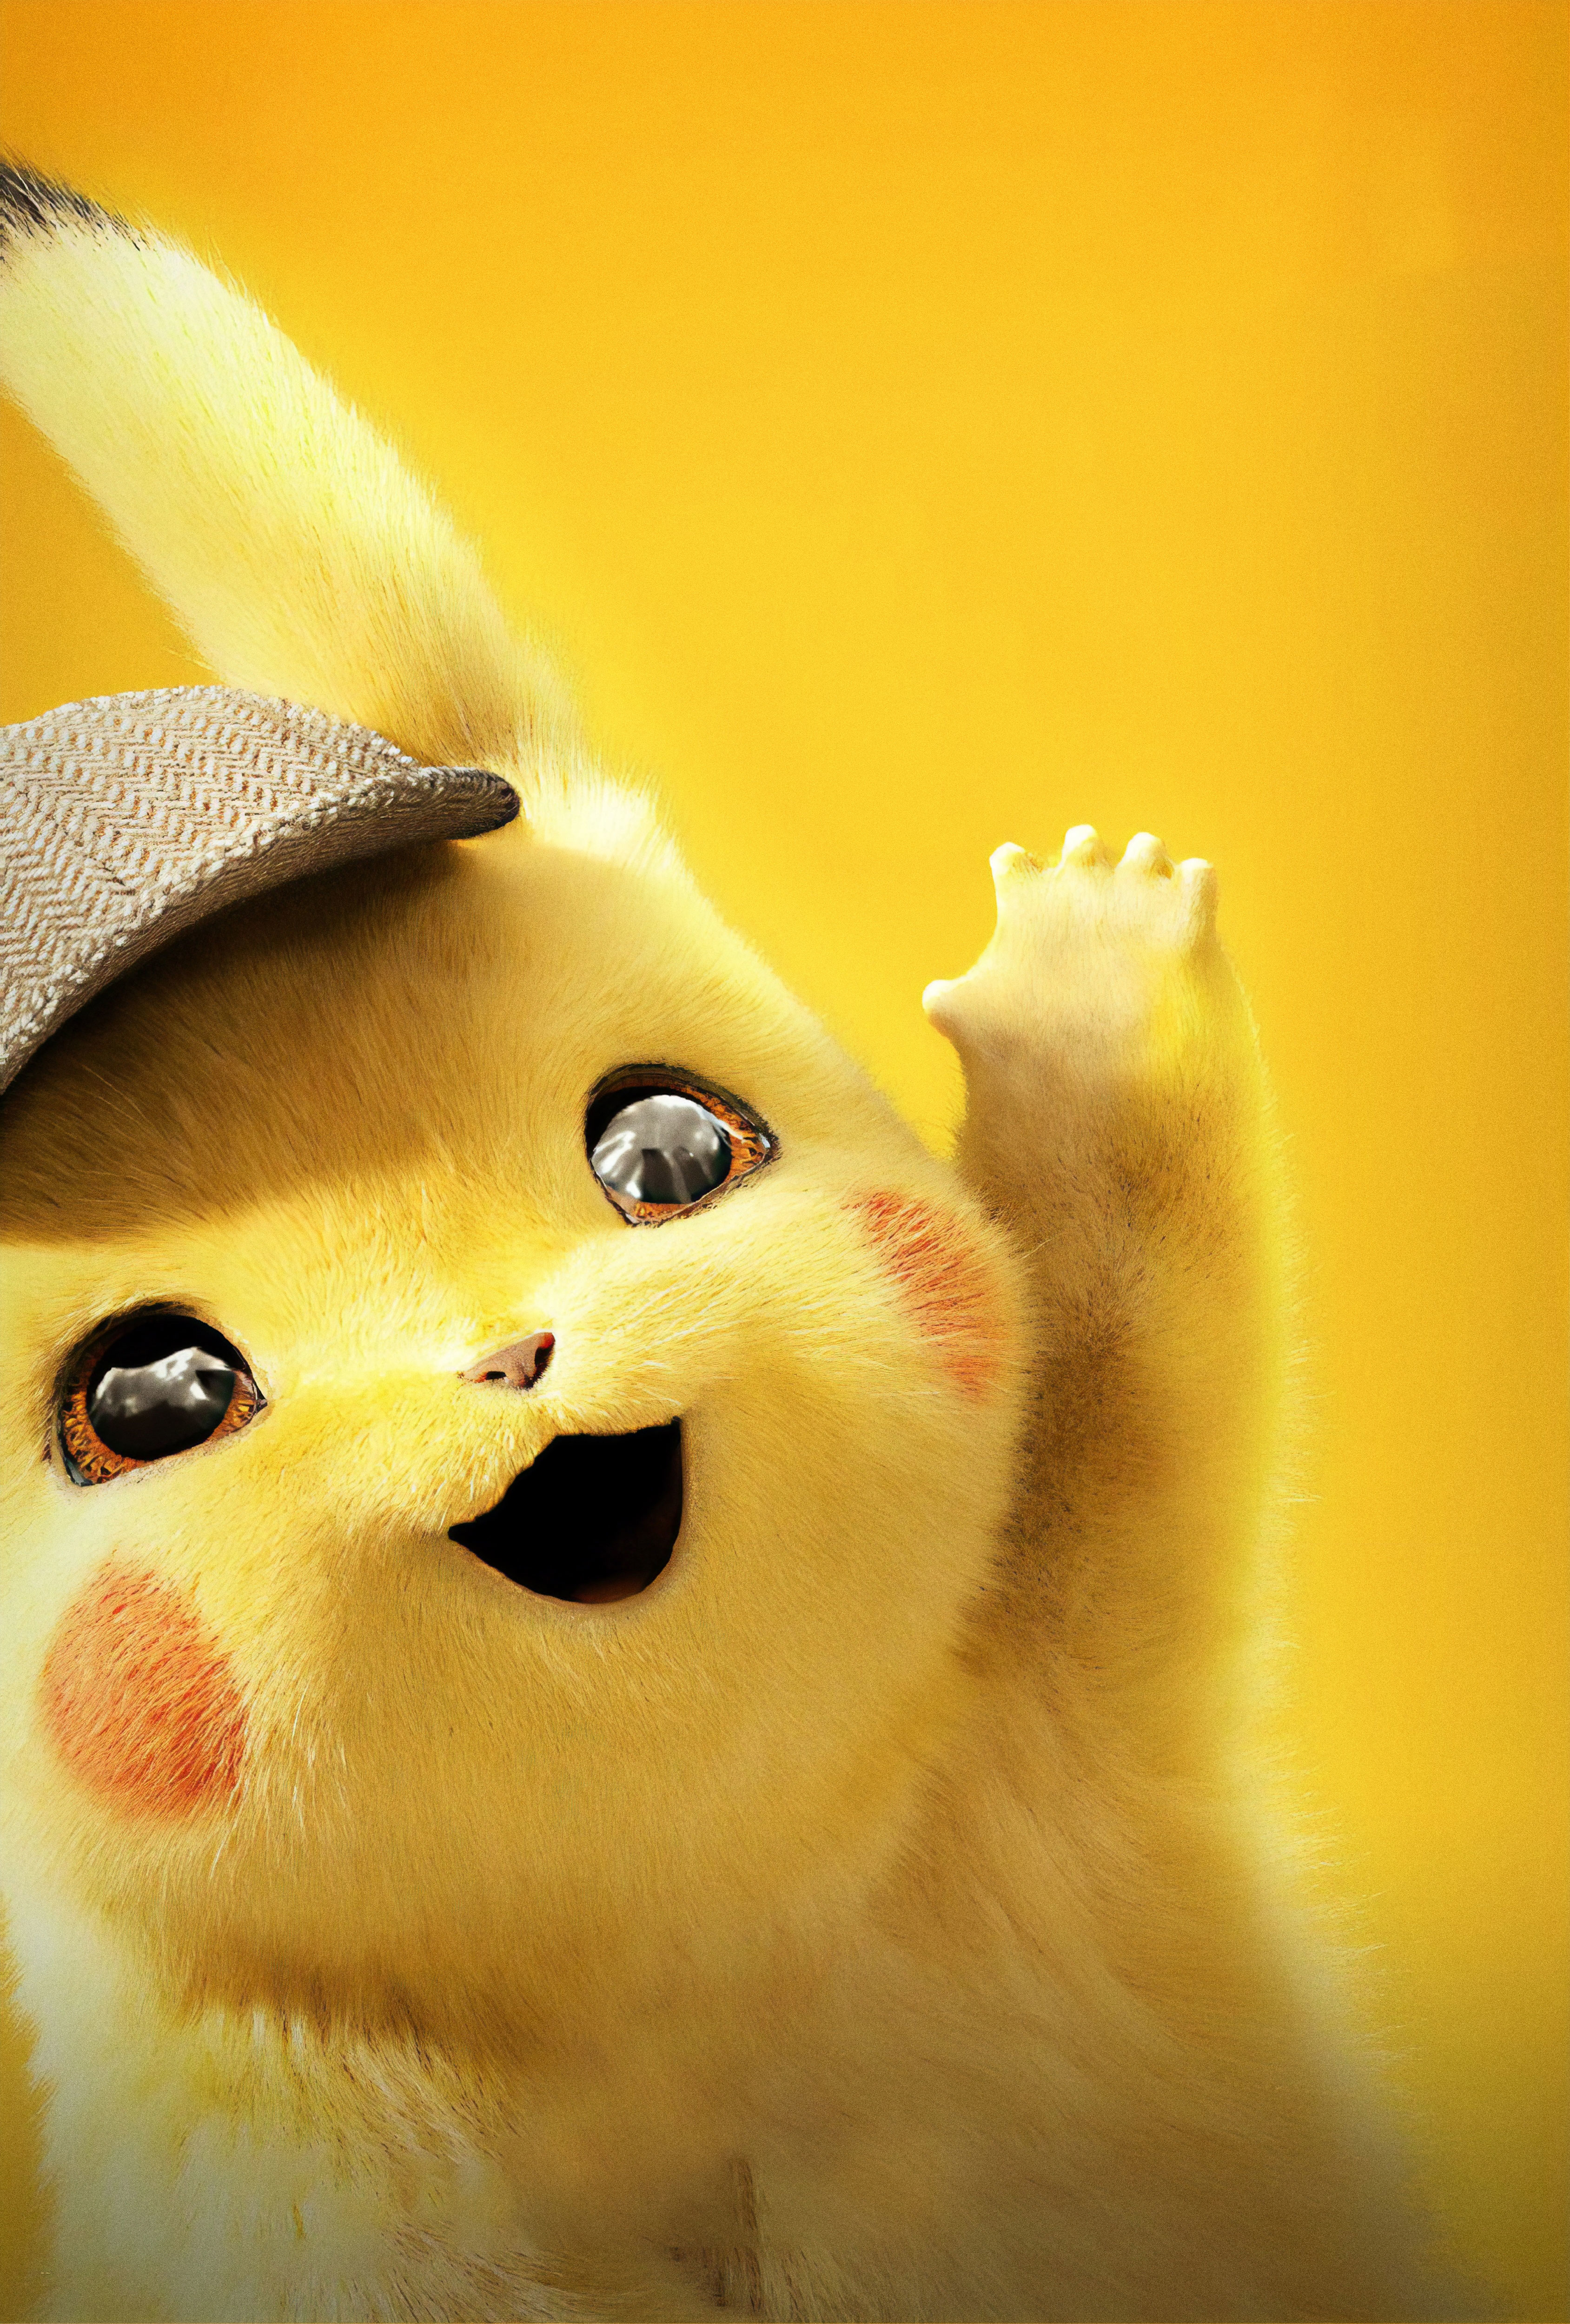 Detective Pikachu Wallpaper, HD Movies 4K Wallpapers, Images, Photos